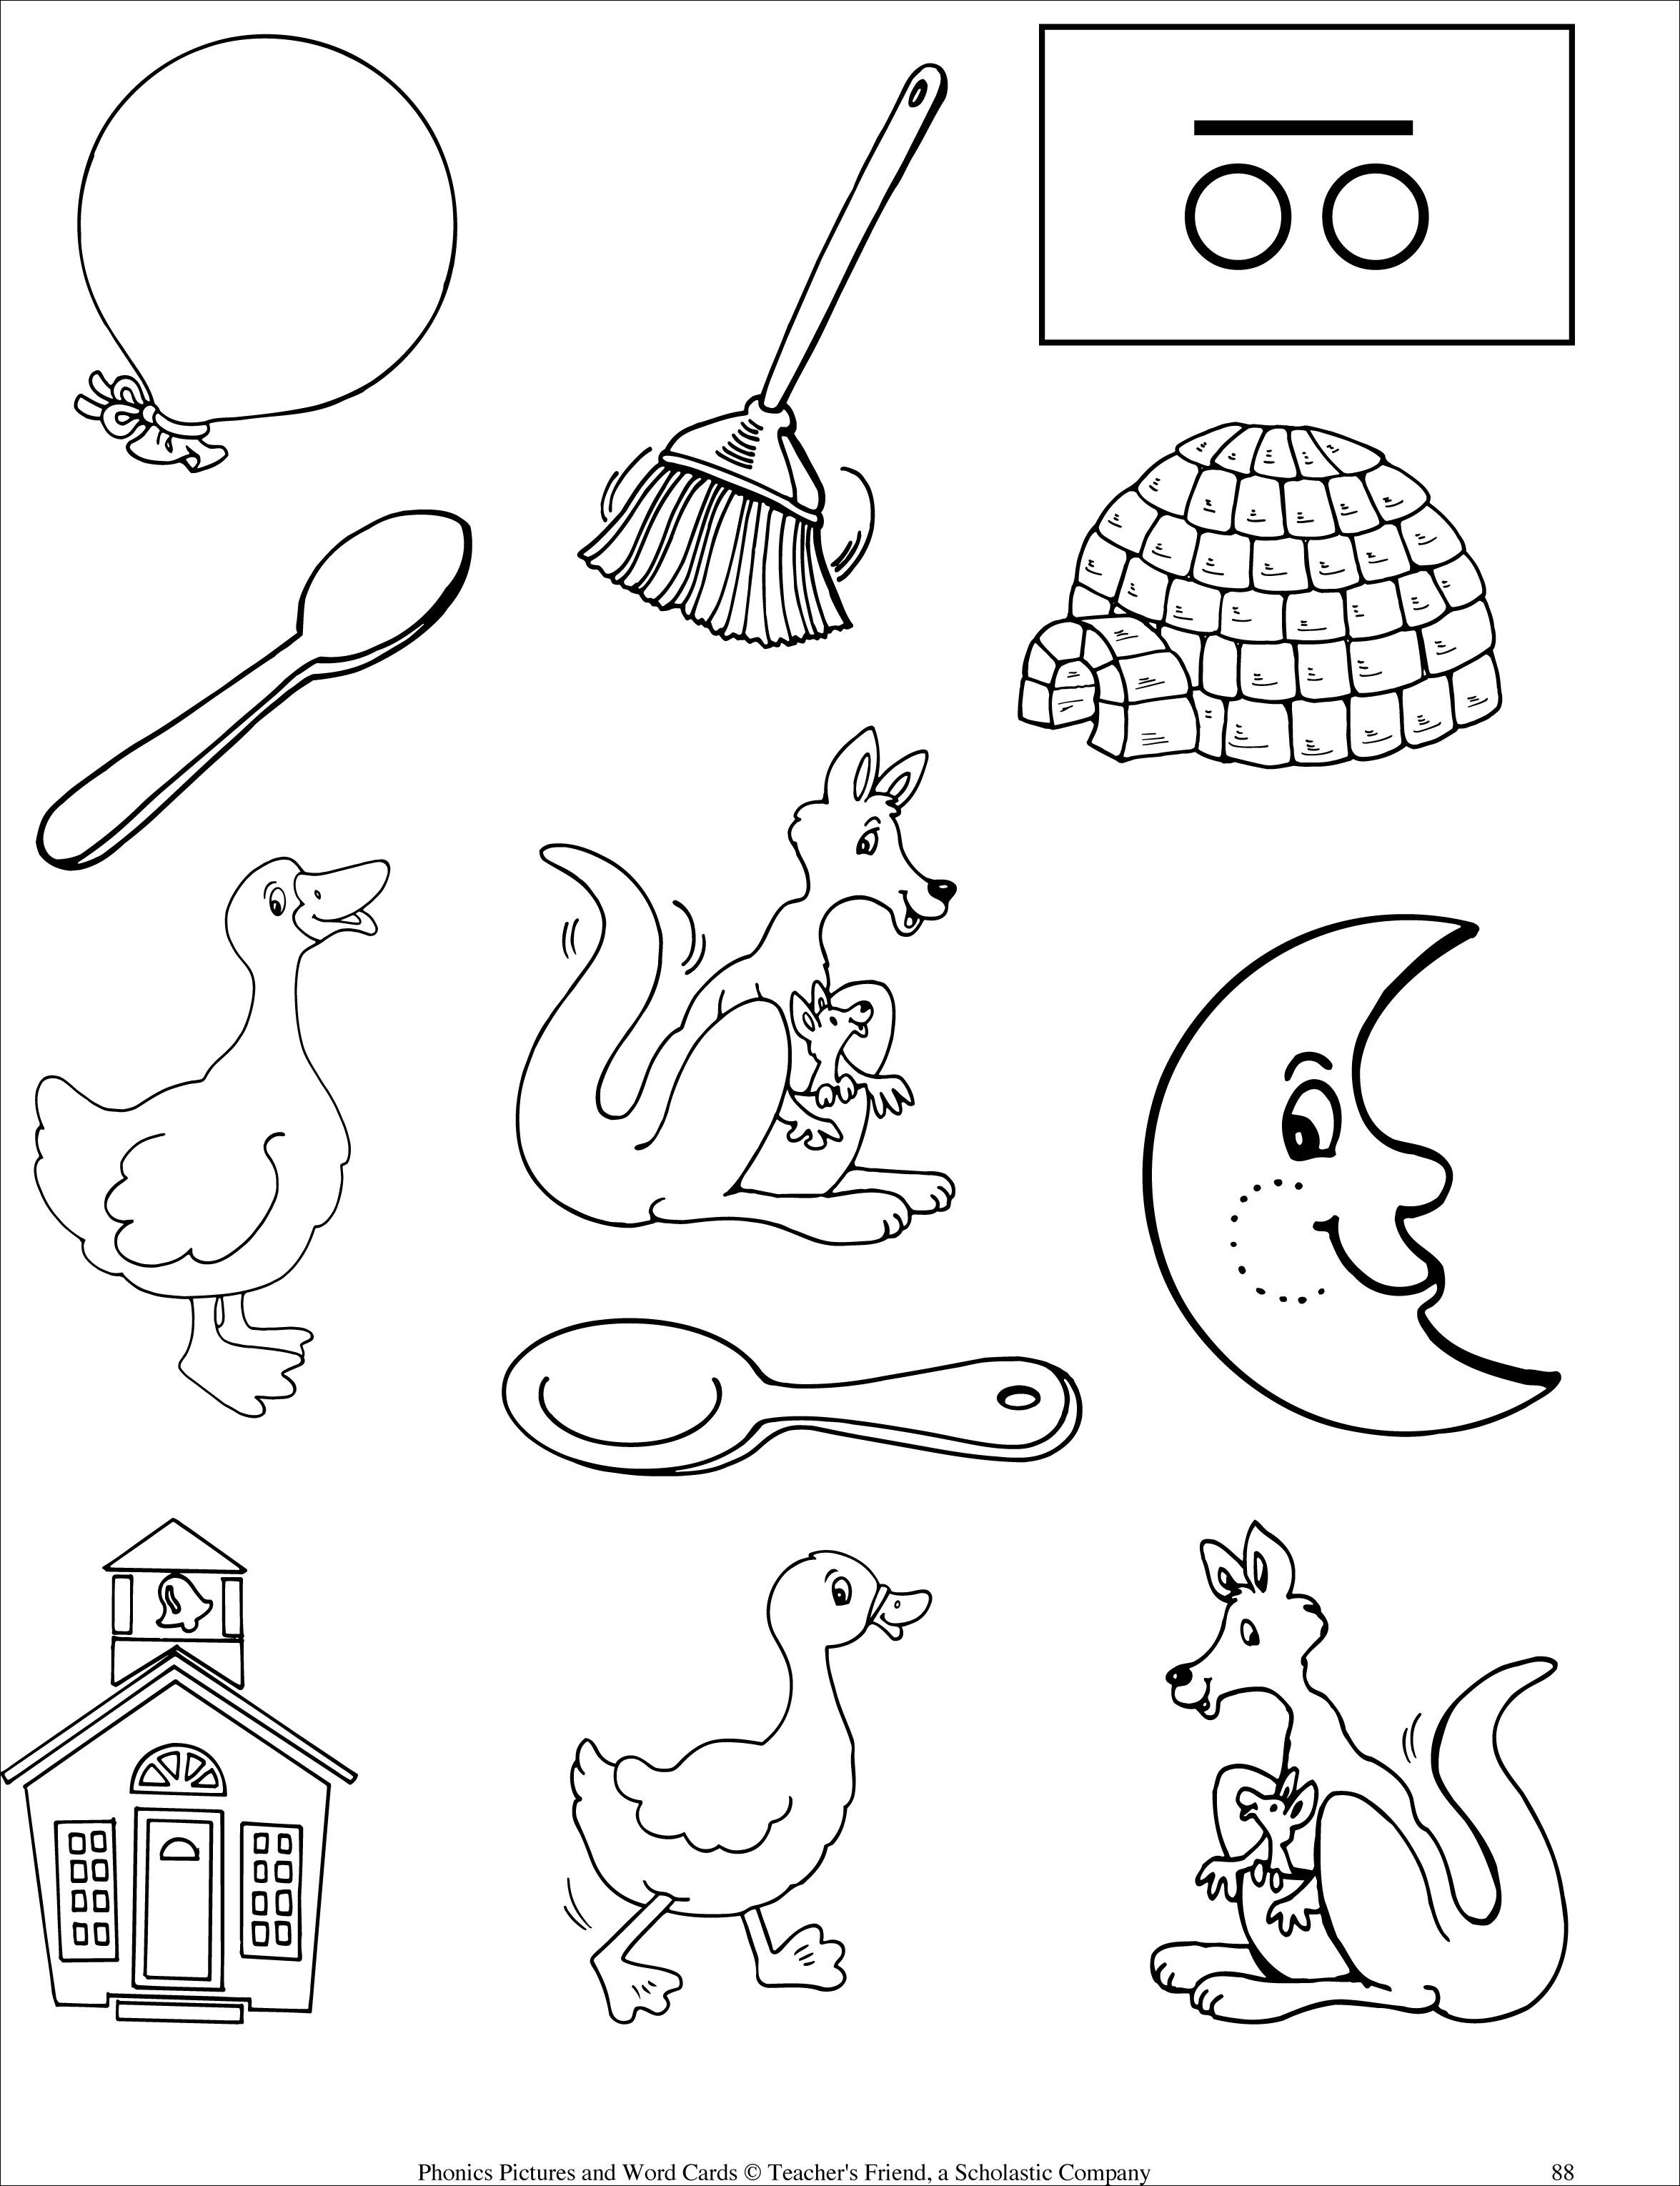 Words with Oo Sound Worksheets